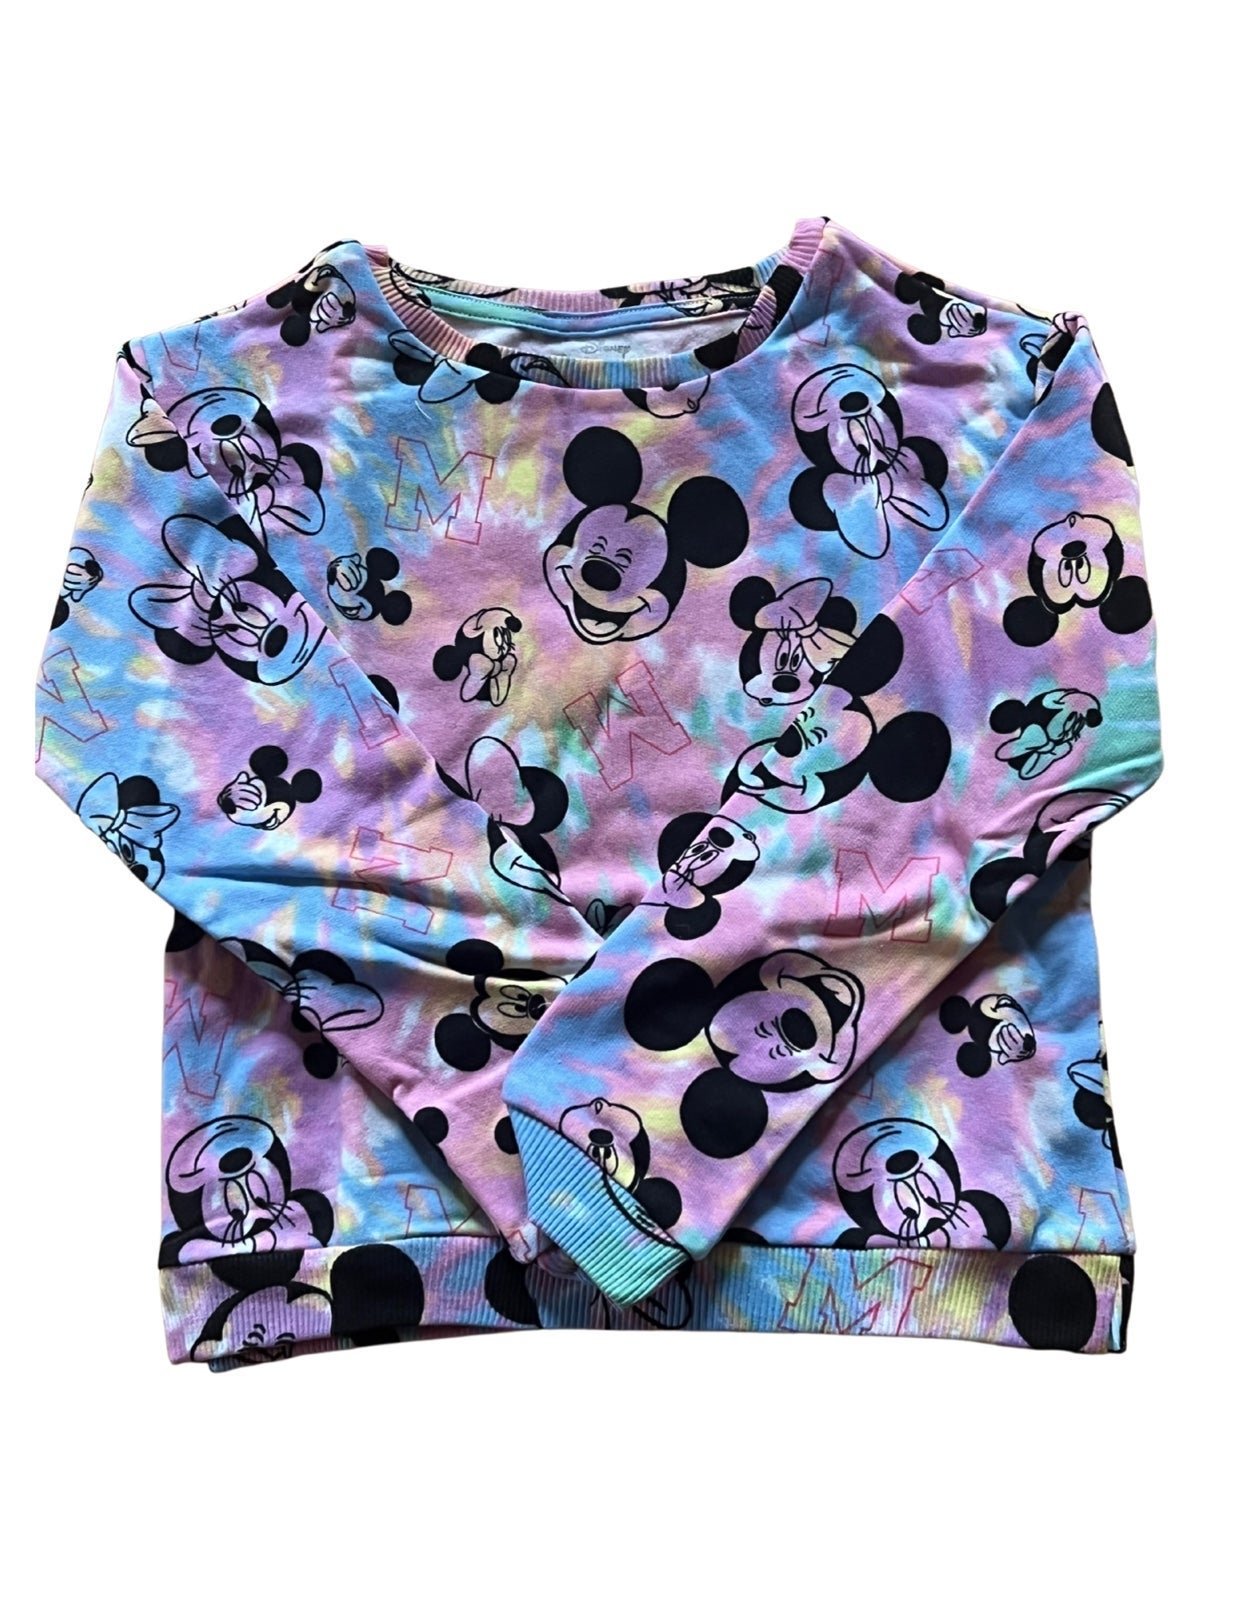 where to buy  Disney Mickey and Minnie Mouse sweat shir